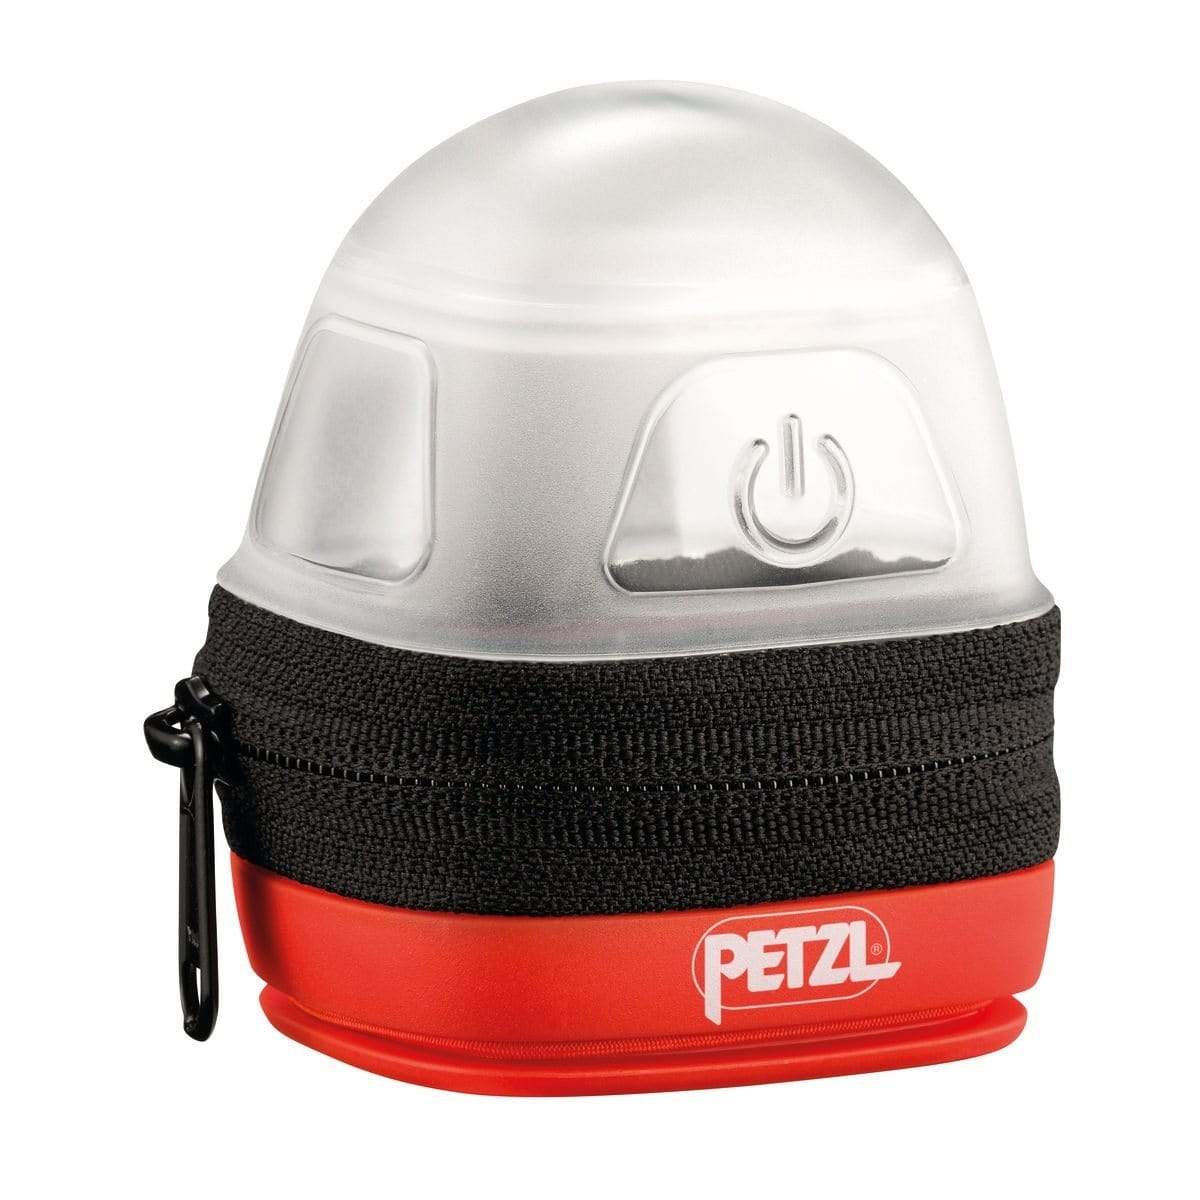 PETZL NOCTILIGHT Protective carrying case for Petzl's compact headlamps | Diffuses light into lantern. - ExtremeMeters.com